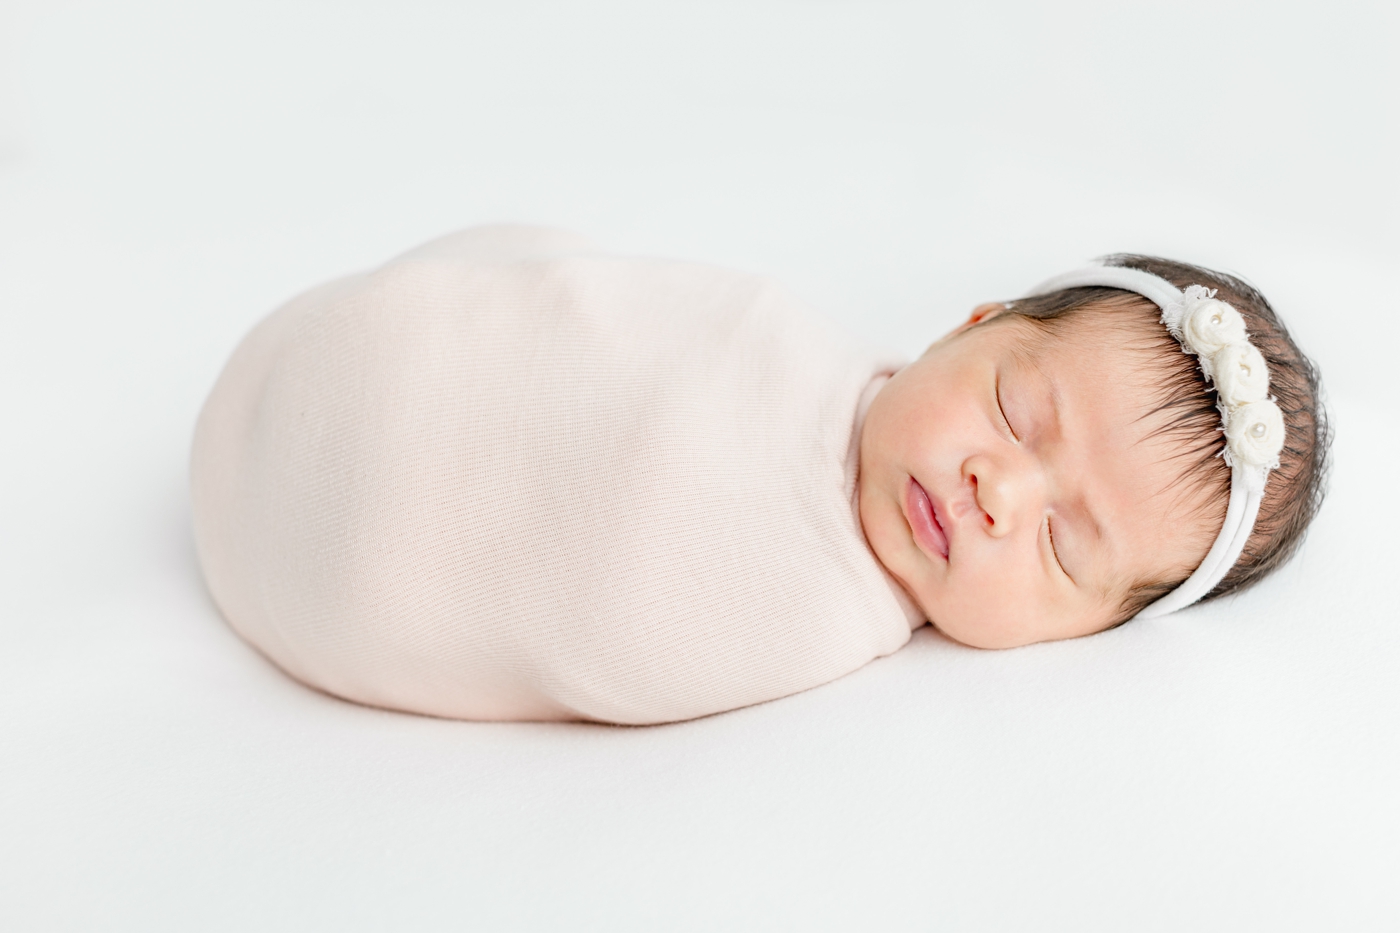 Sleeping baby in blush pink swaddle with white headband. Photo by Sana Ahmed Photography.